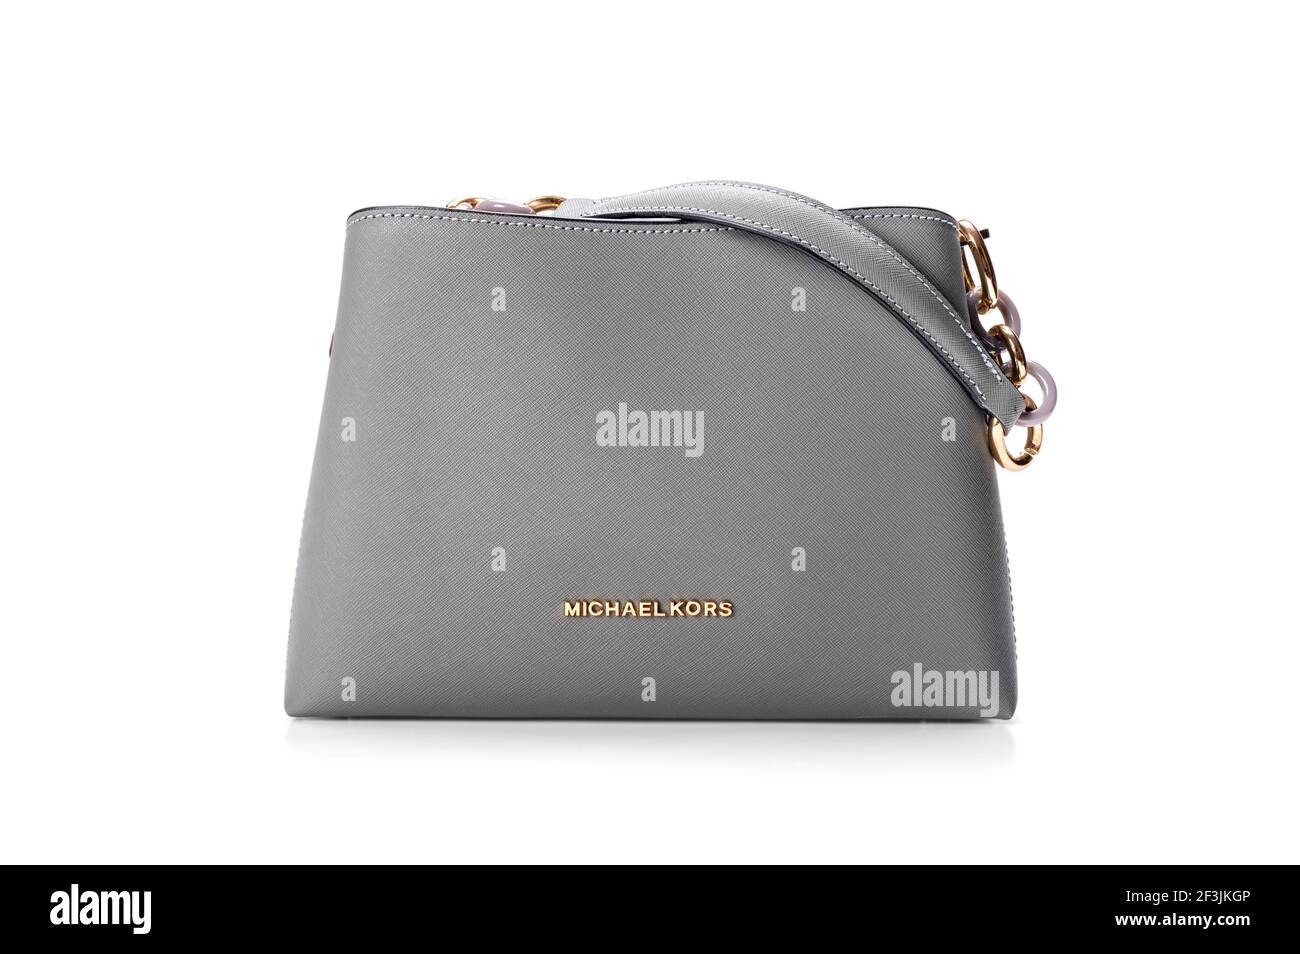 MOSCOW, RUSSIA - MARCH, 17, 2021: new model leather grey handbag Michael  Kors on white background. Michael Kors brand of clothing, accessories and  per Stock Photo - Alamy